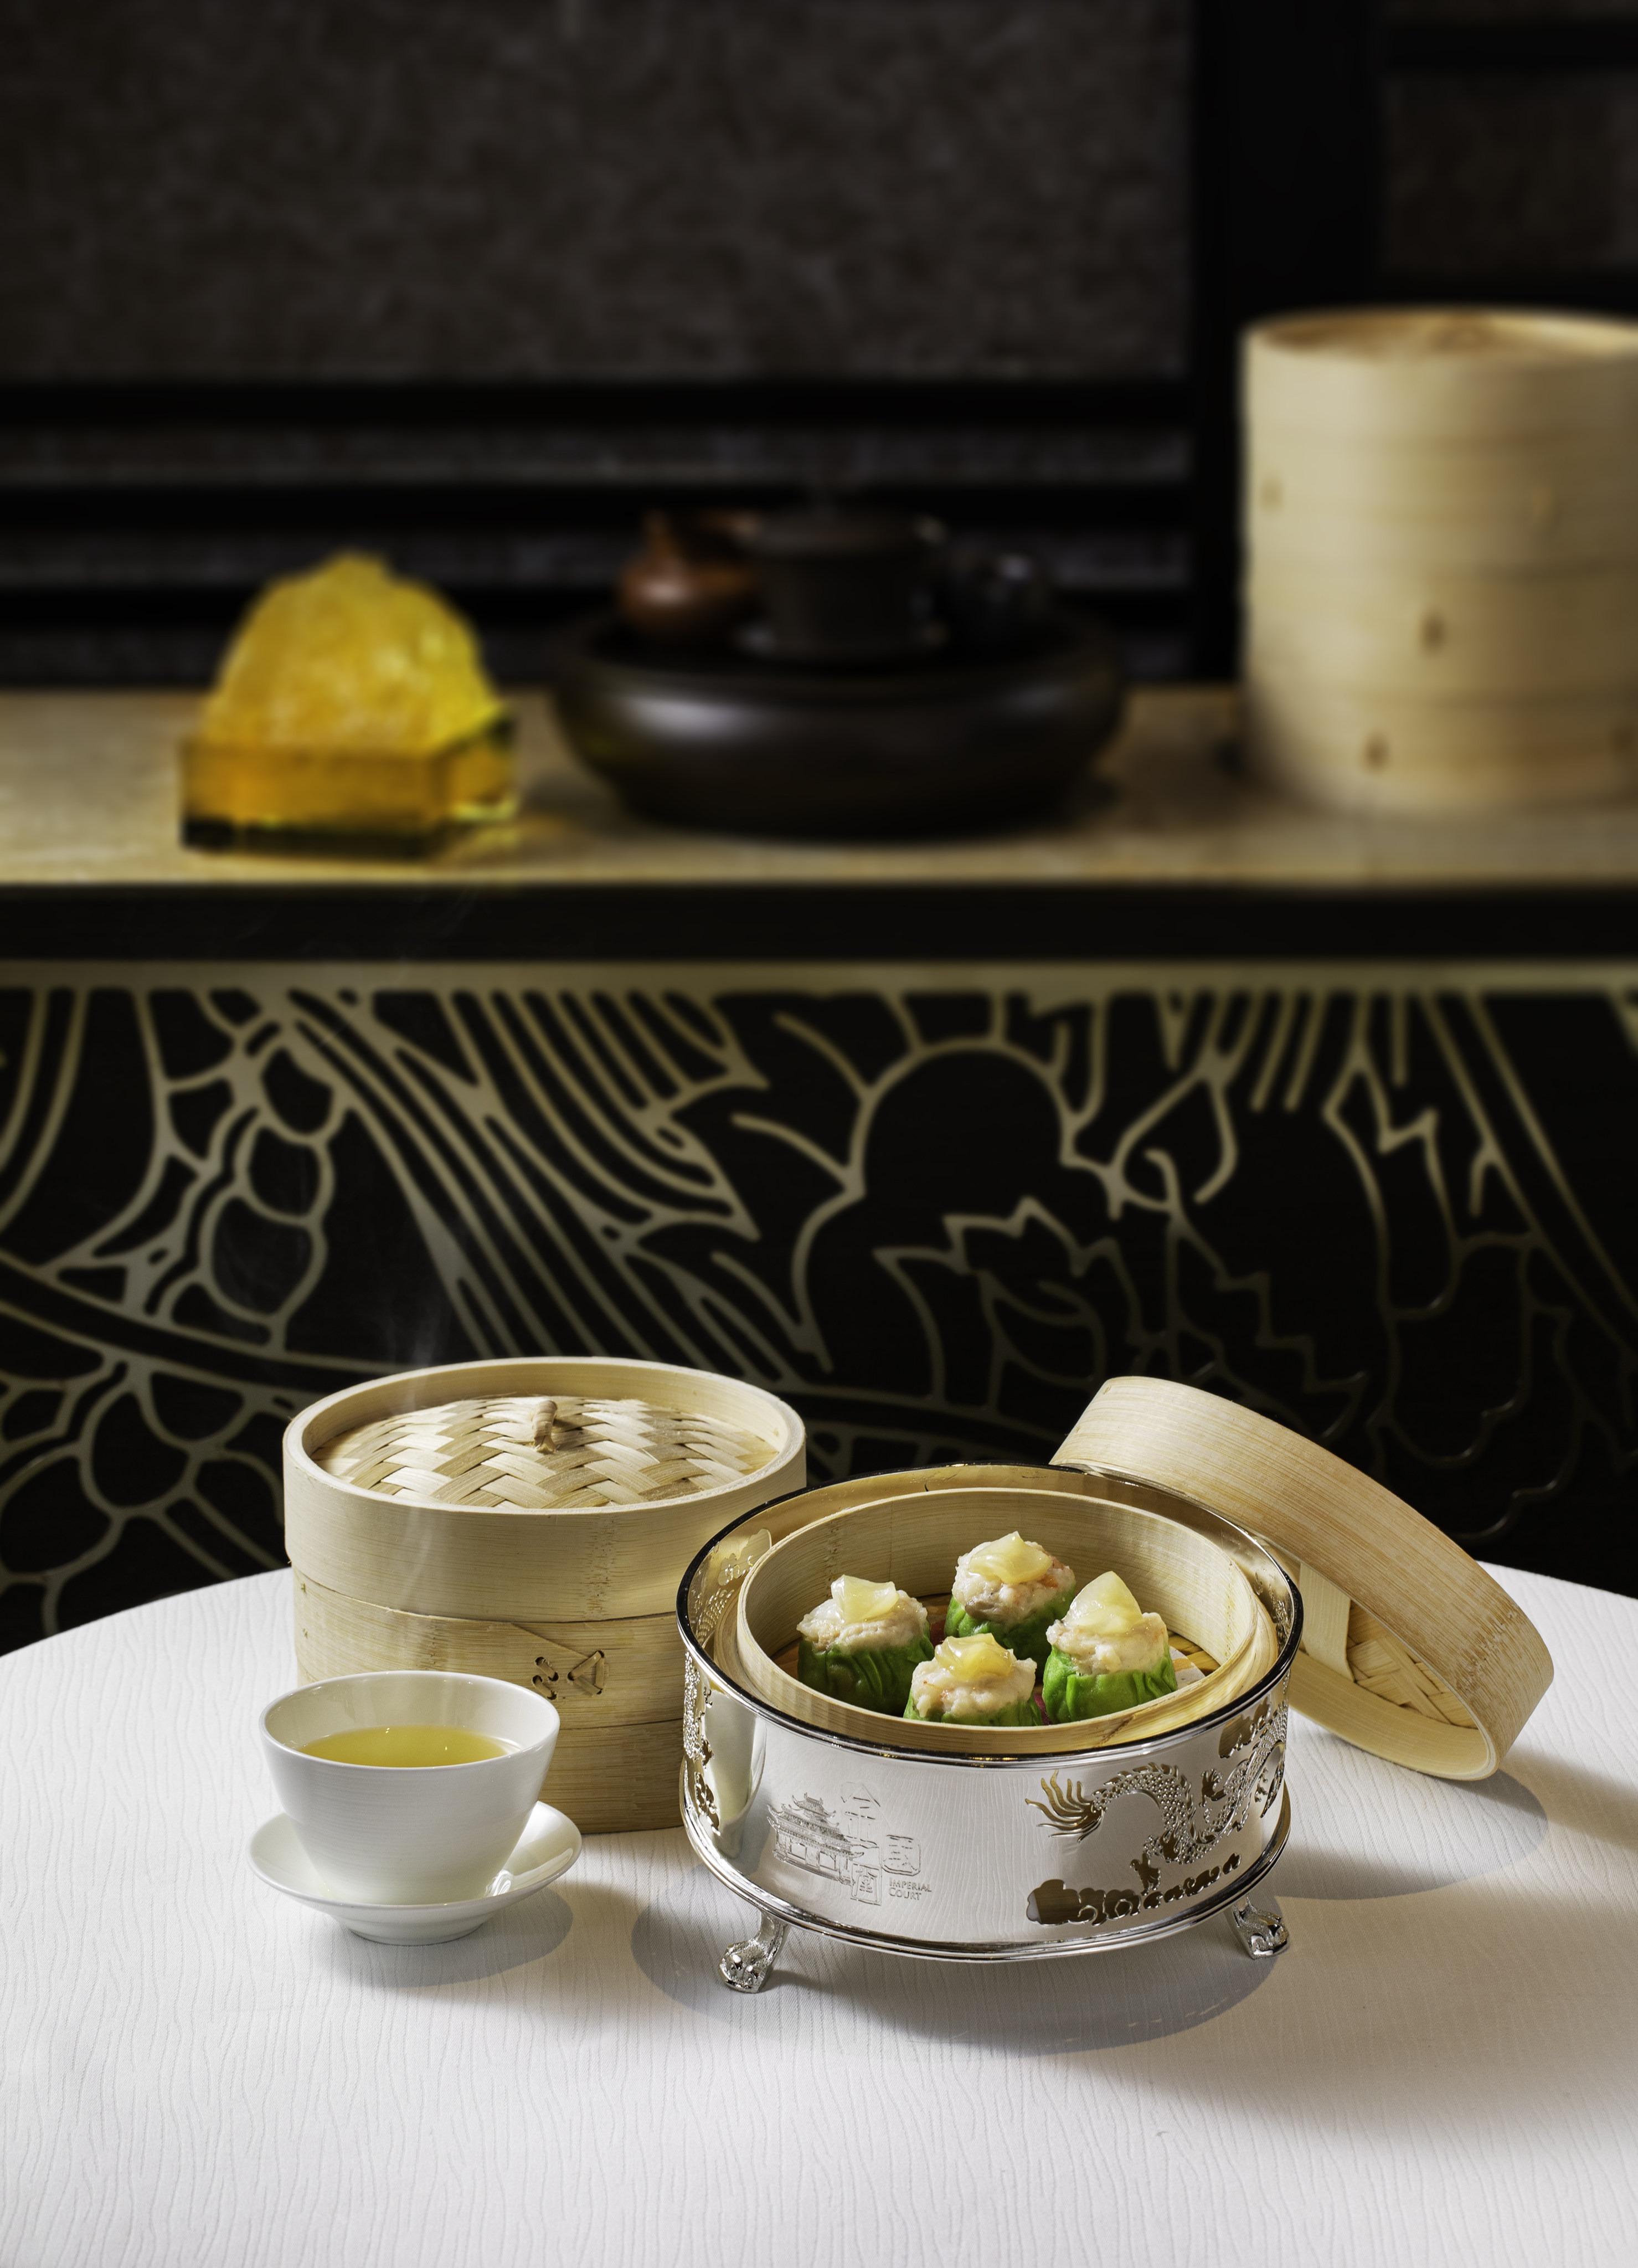 There is a plethora of dining options in Macau to book with Visa this summer, from Michelin-starred restaurants to establishments in hotels. Photo: Handout